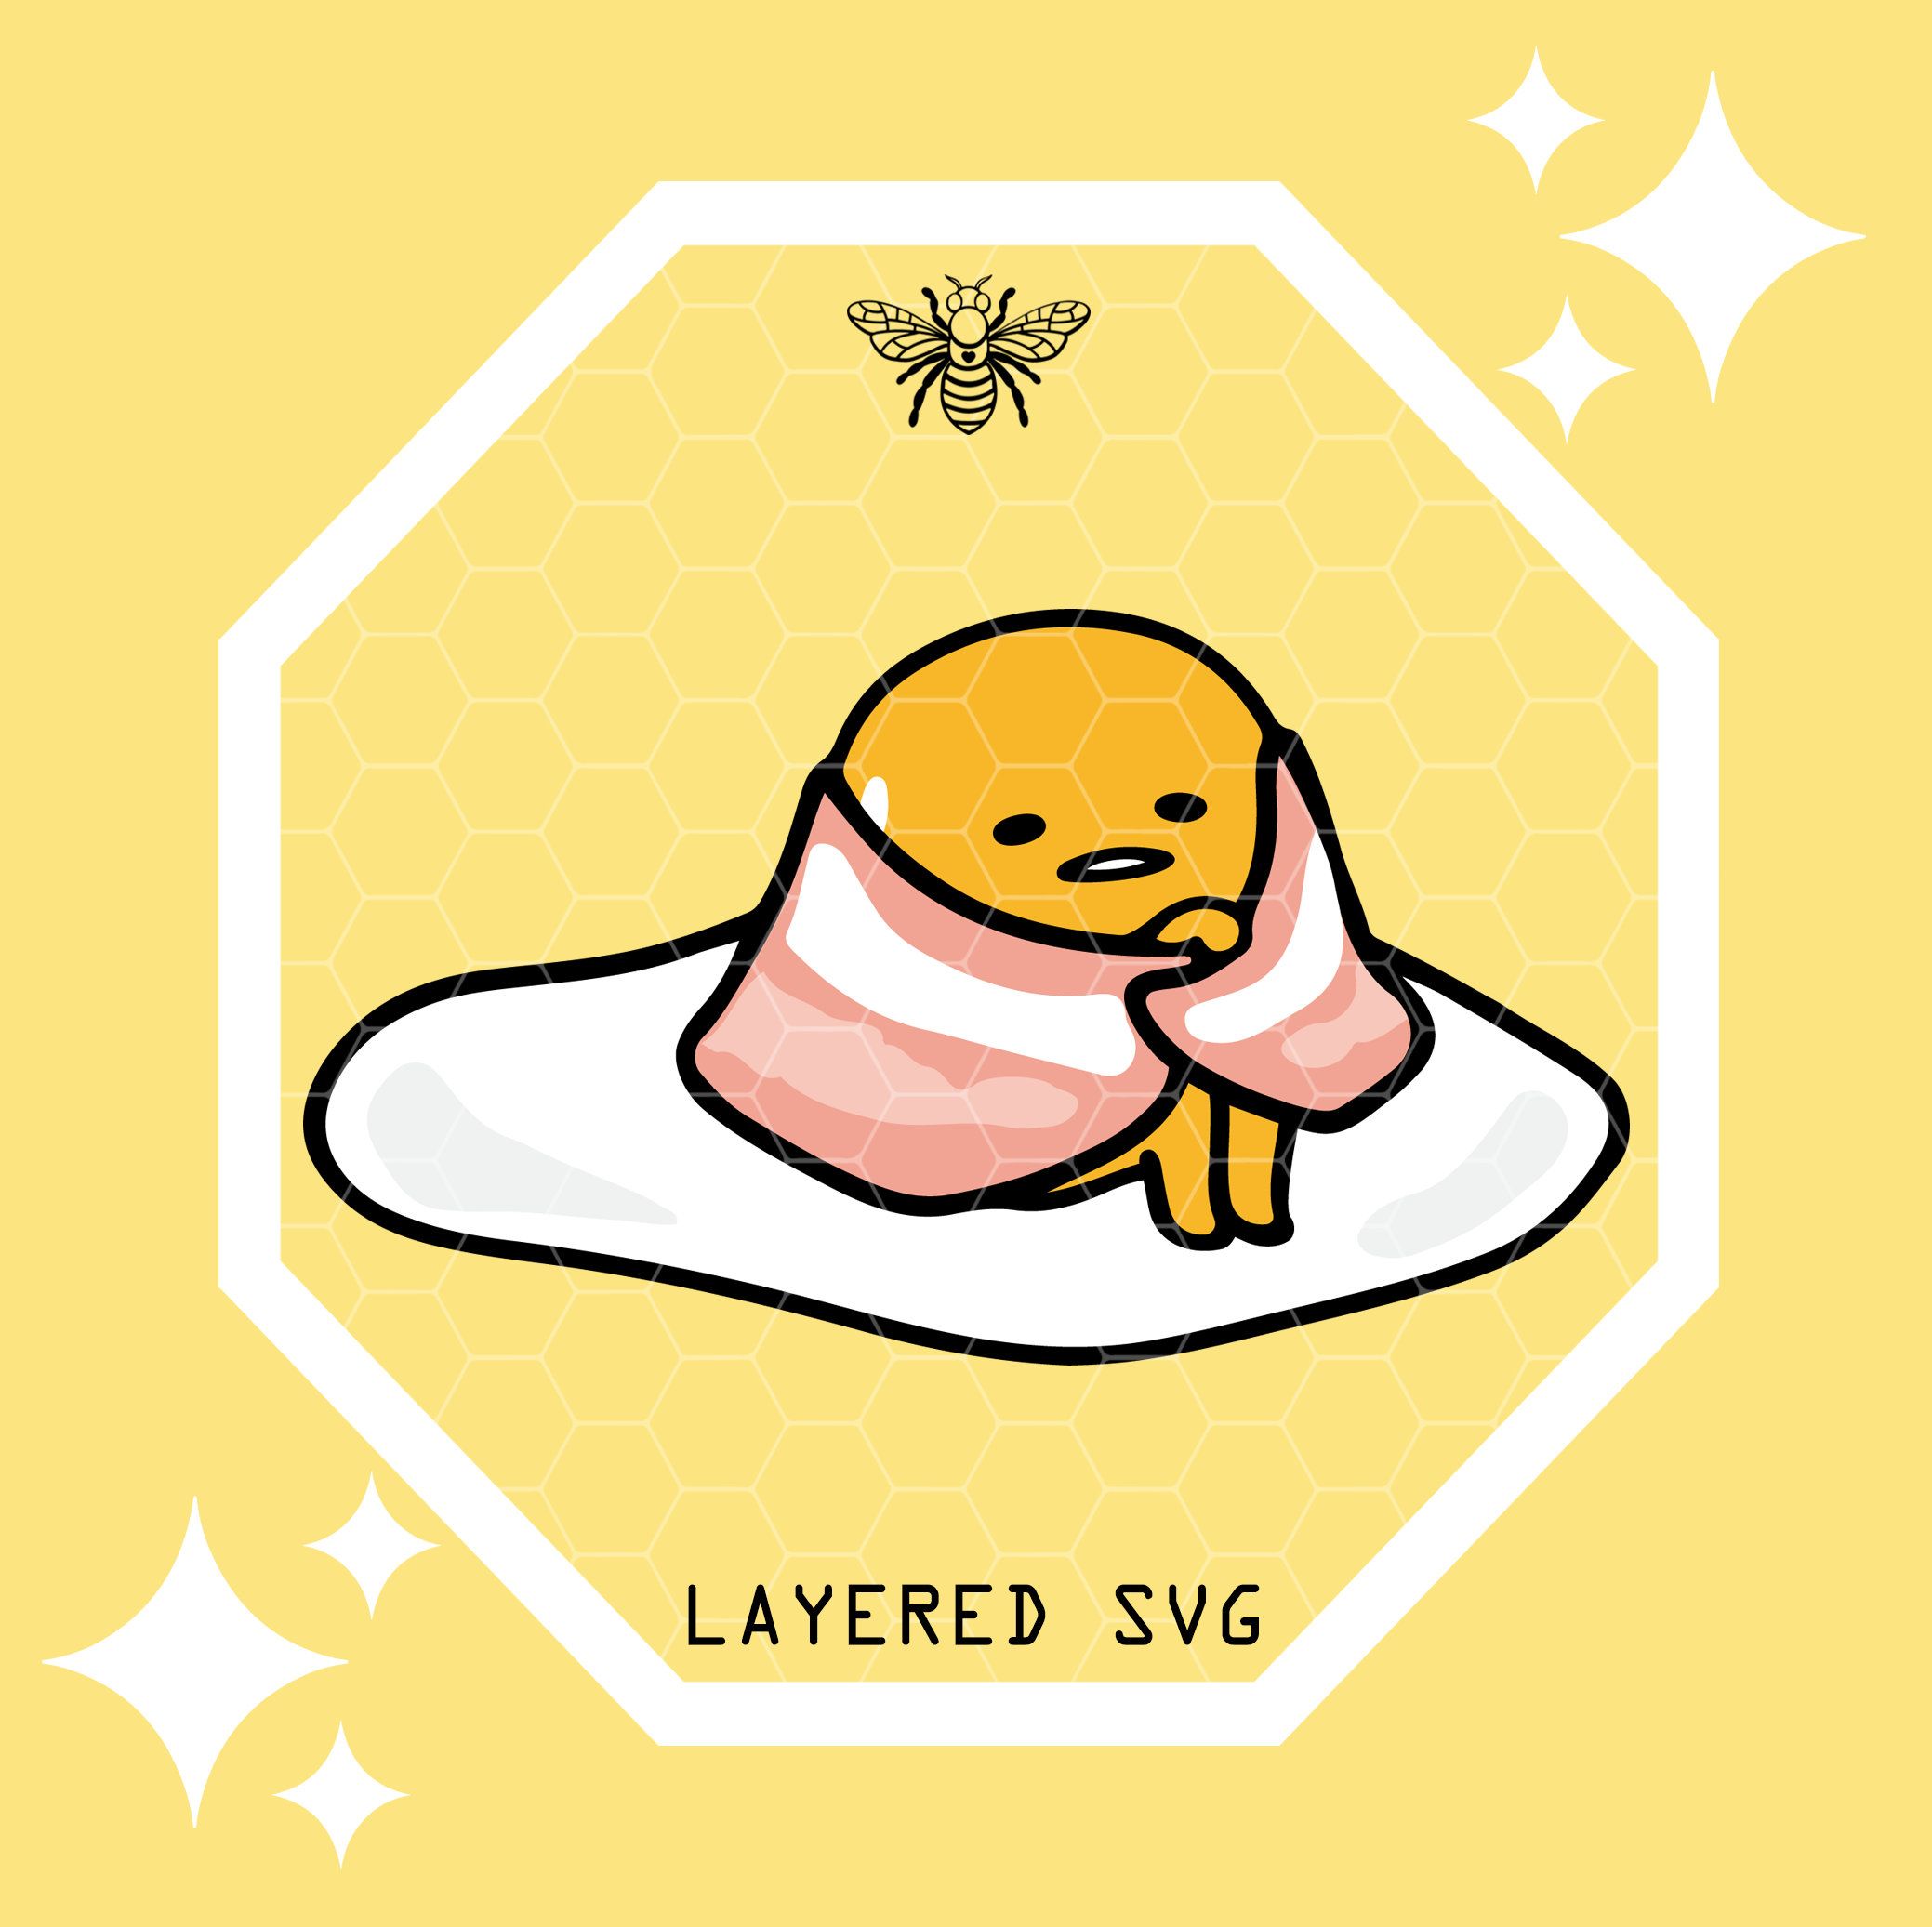 A cartoon egg with an image of it being wrapped in blankets - Gudetama